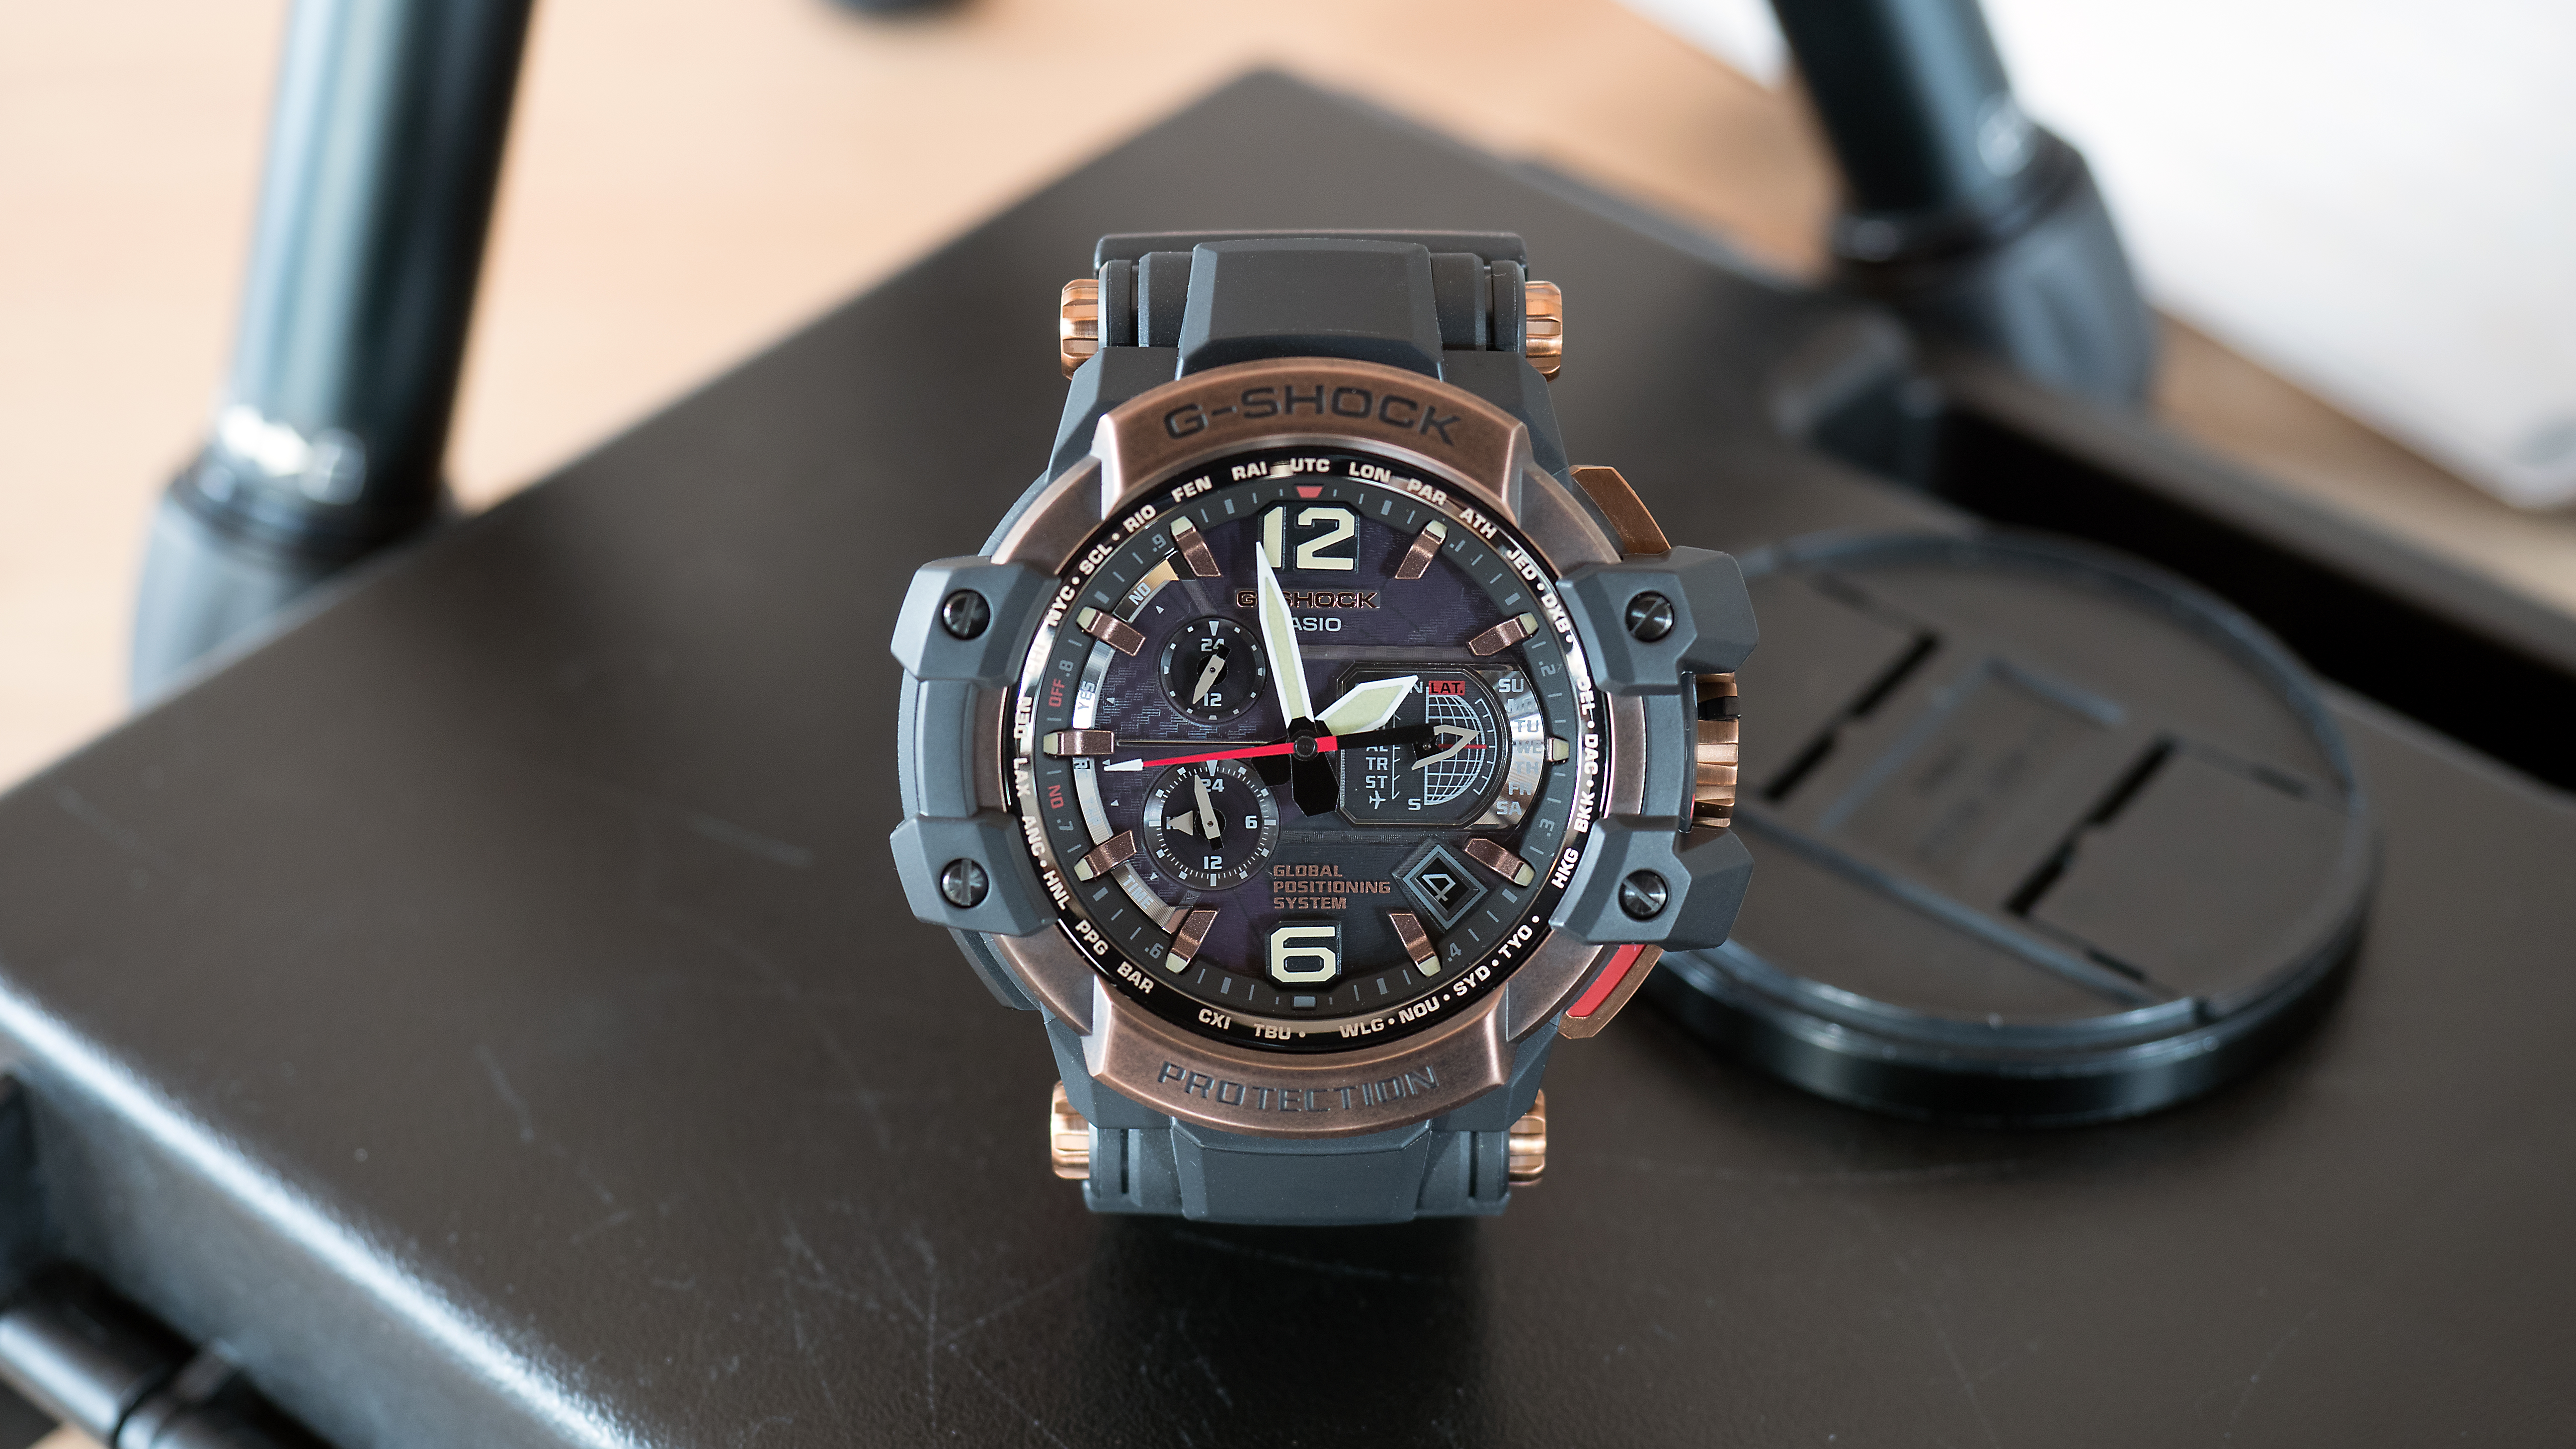 Hands-On: The Casio G-Shock Master Of G Gravitymaster GPW1000RG-1A